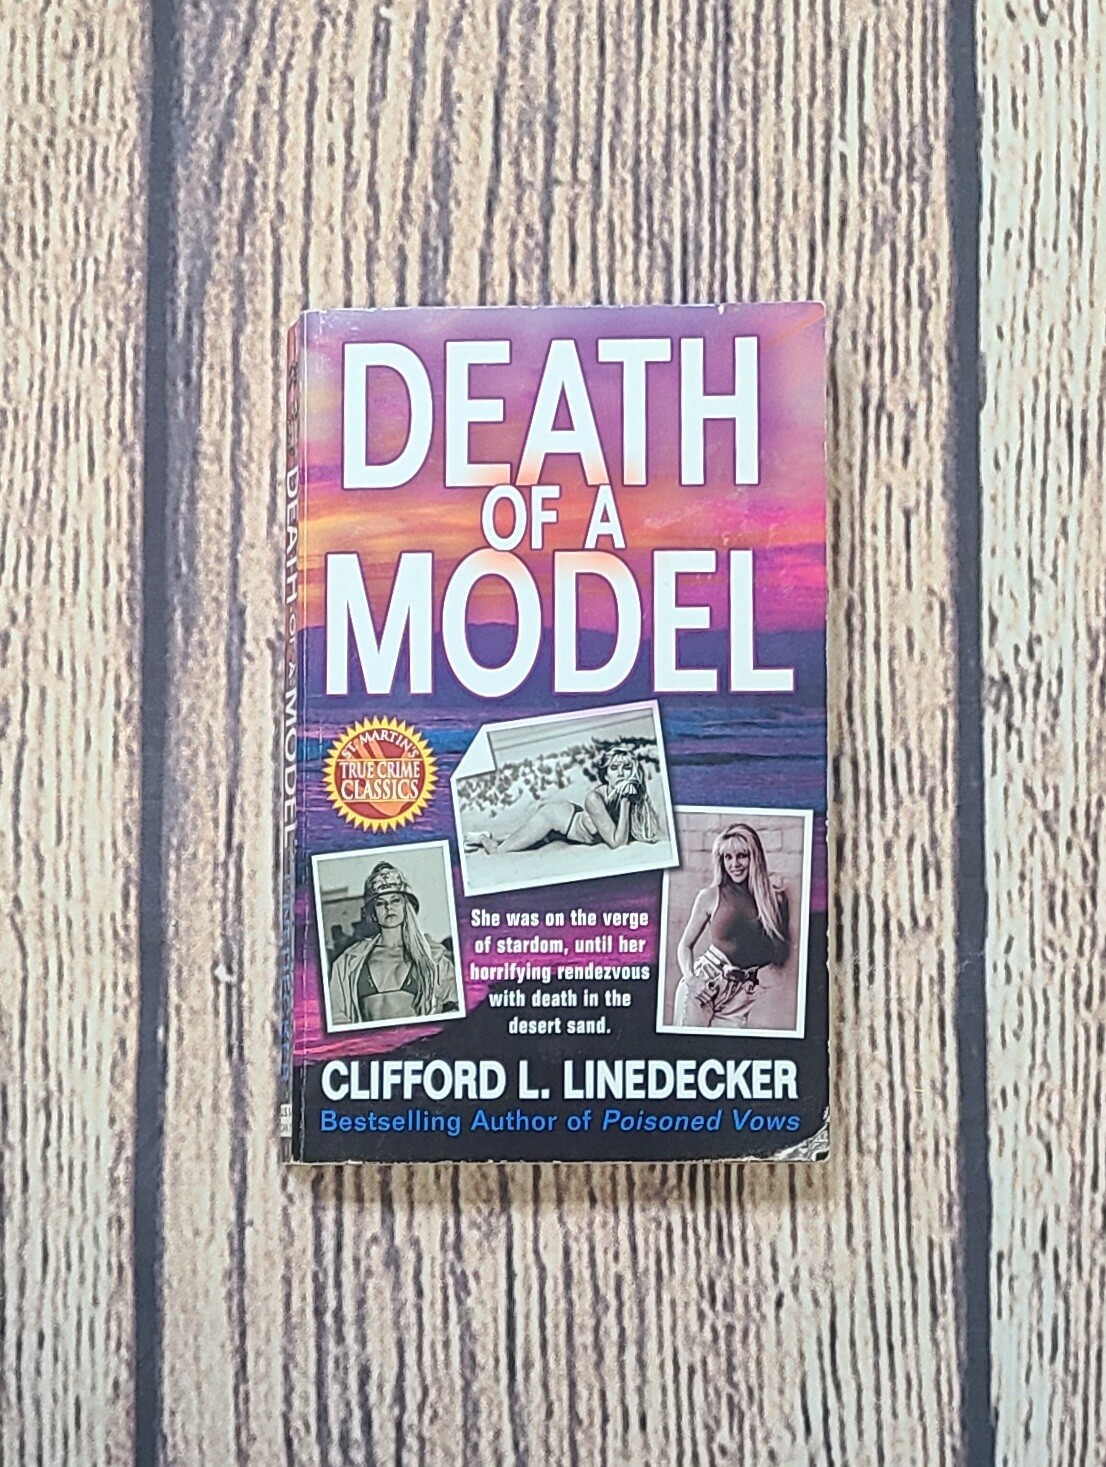 Death of a Model by Clifford L. Linedecker